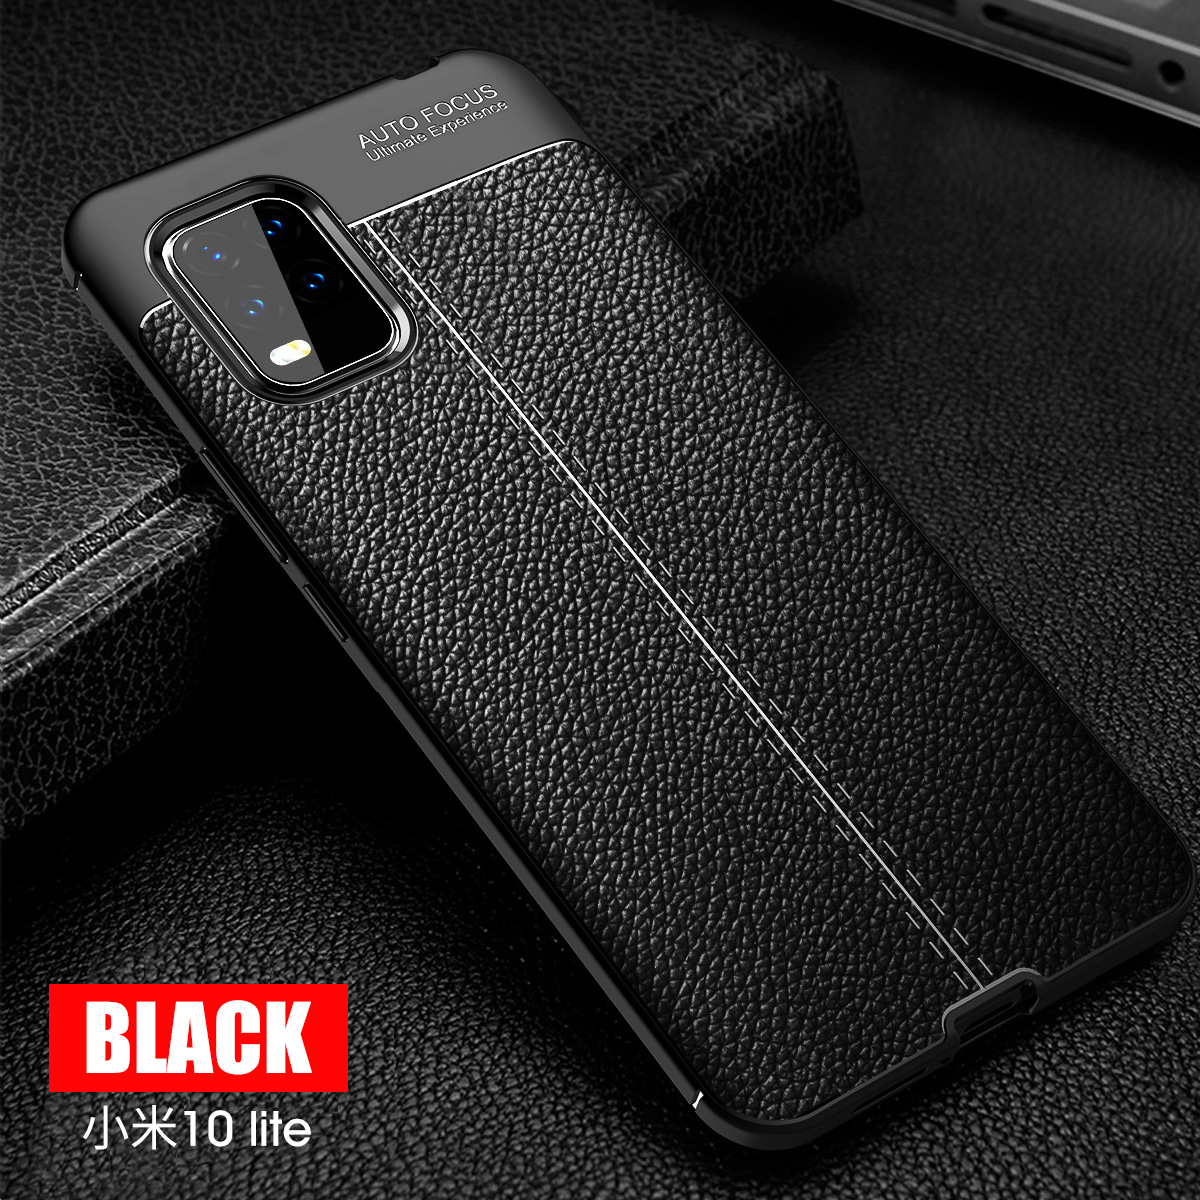 Bakeey-for-Xiaomi-Mi-10-Lite-Case-Litchi-Pattern-Shockproof-PU-Leather-TPU-Soft-Protective-Case-Back-1708407-9